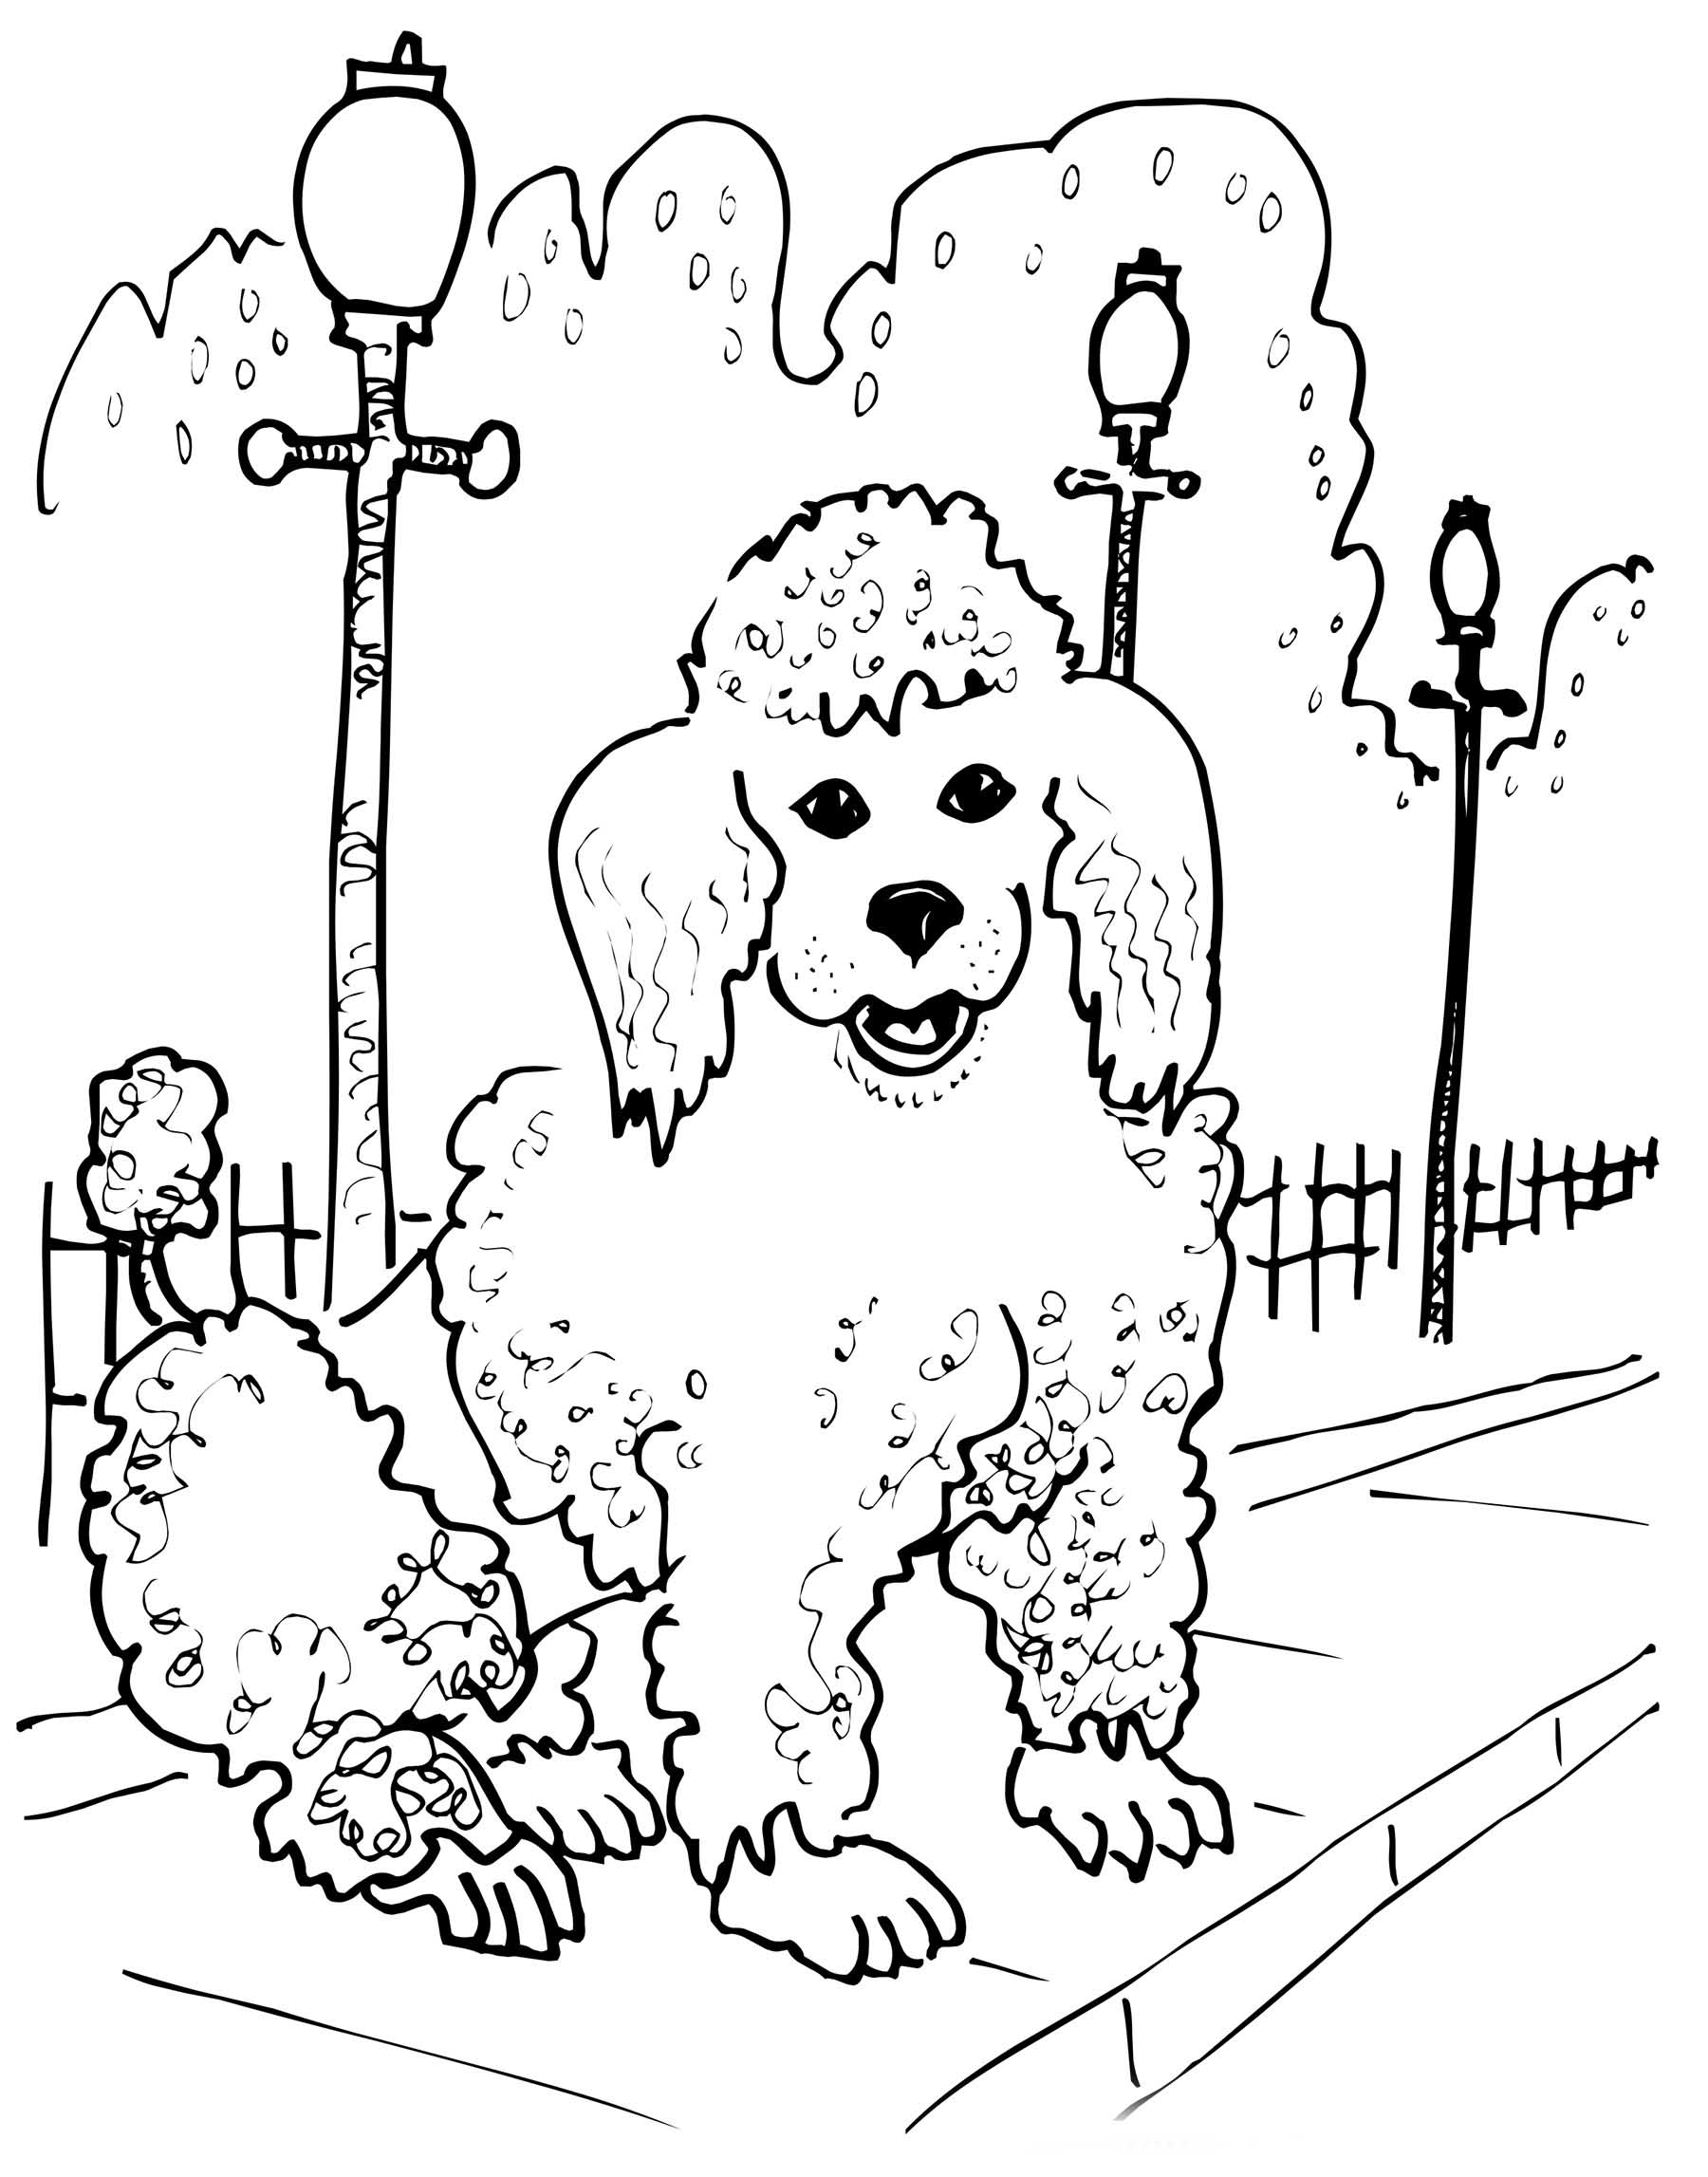 Poodle Coloring Pages to download and print for free